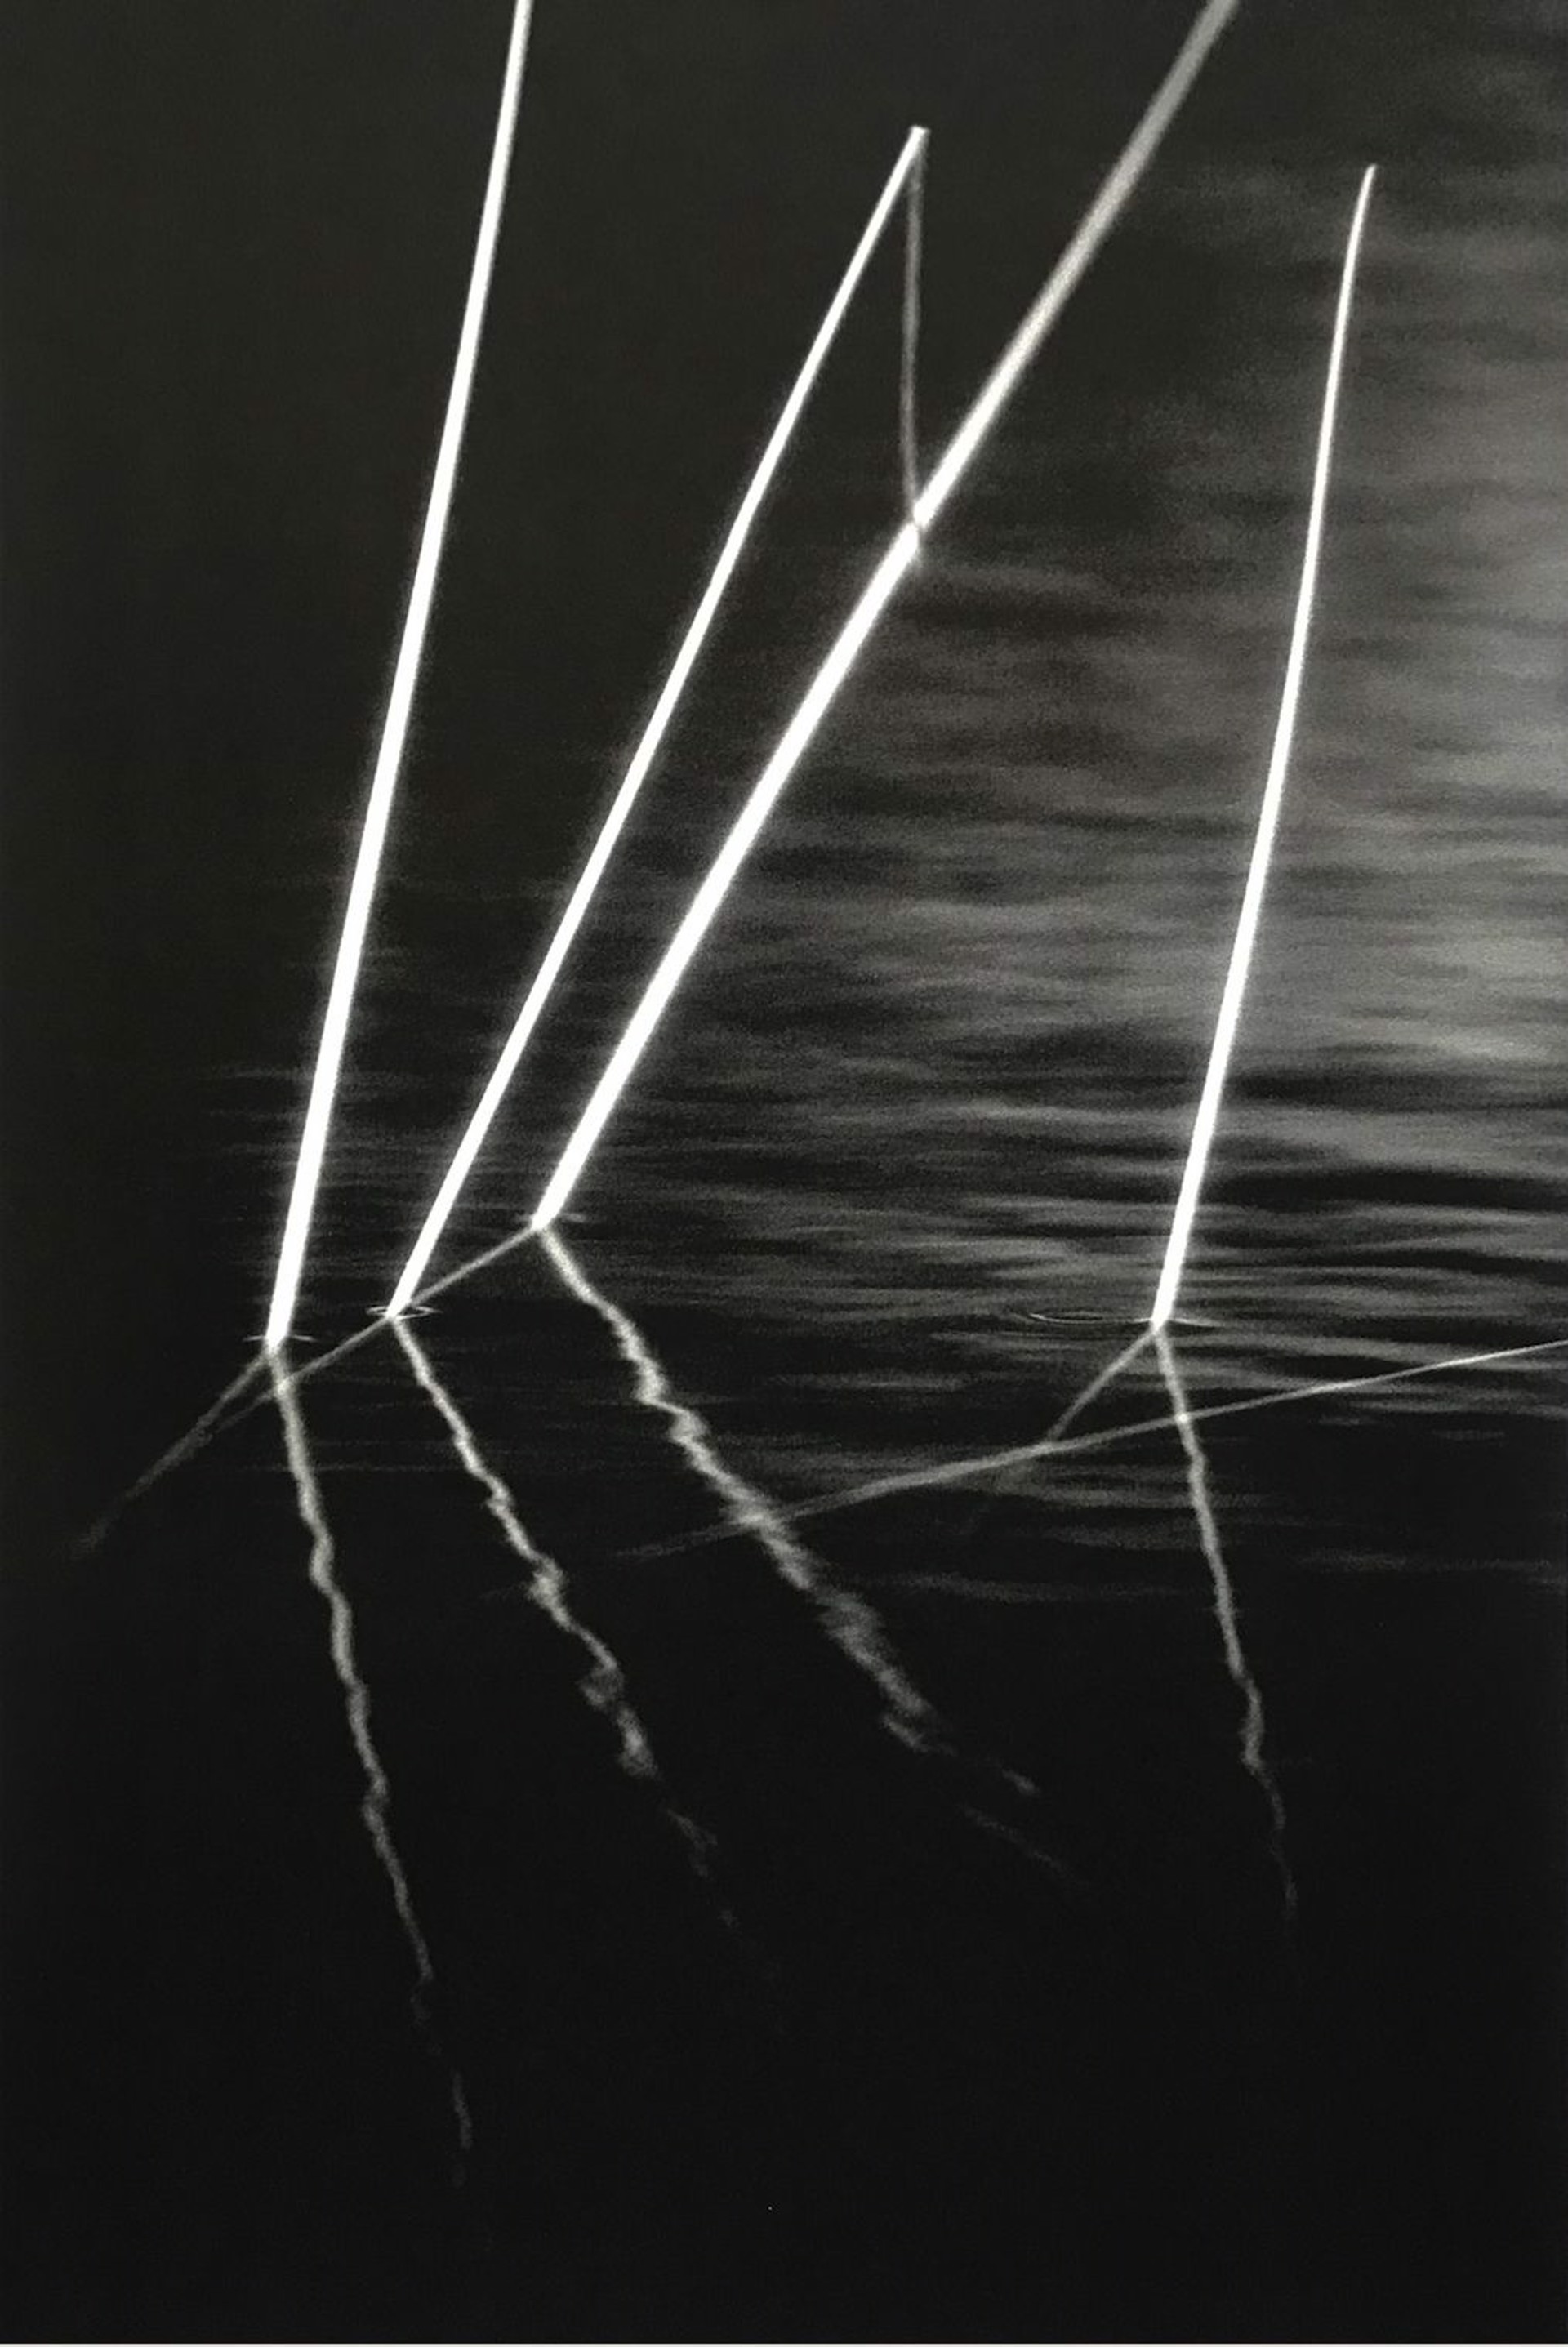 Laughing Reeds 6, 1/15 by Ken Smith